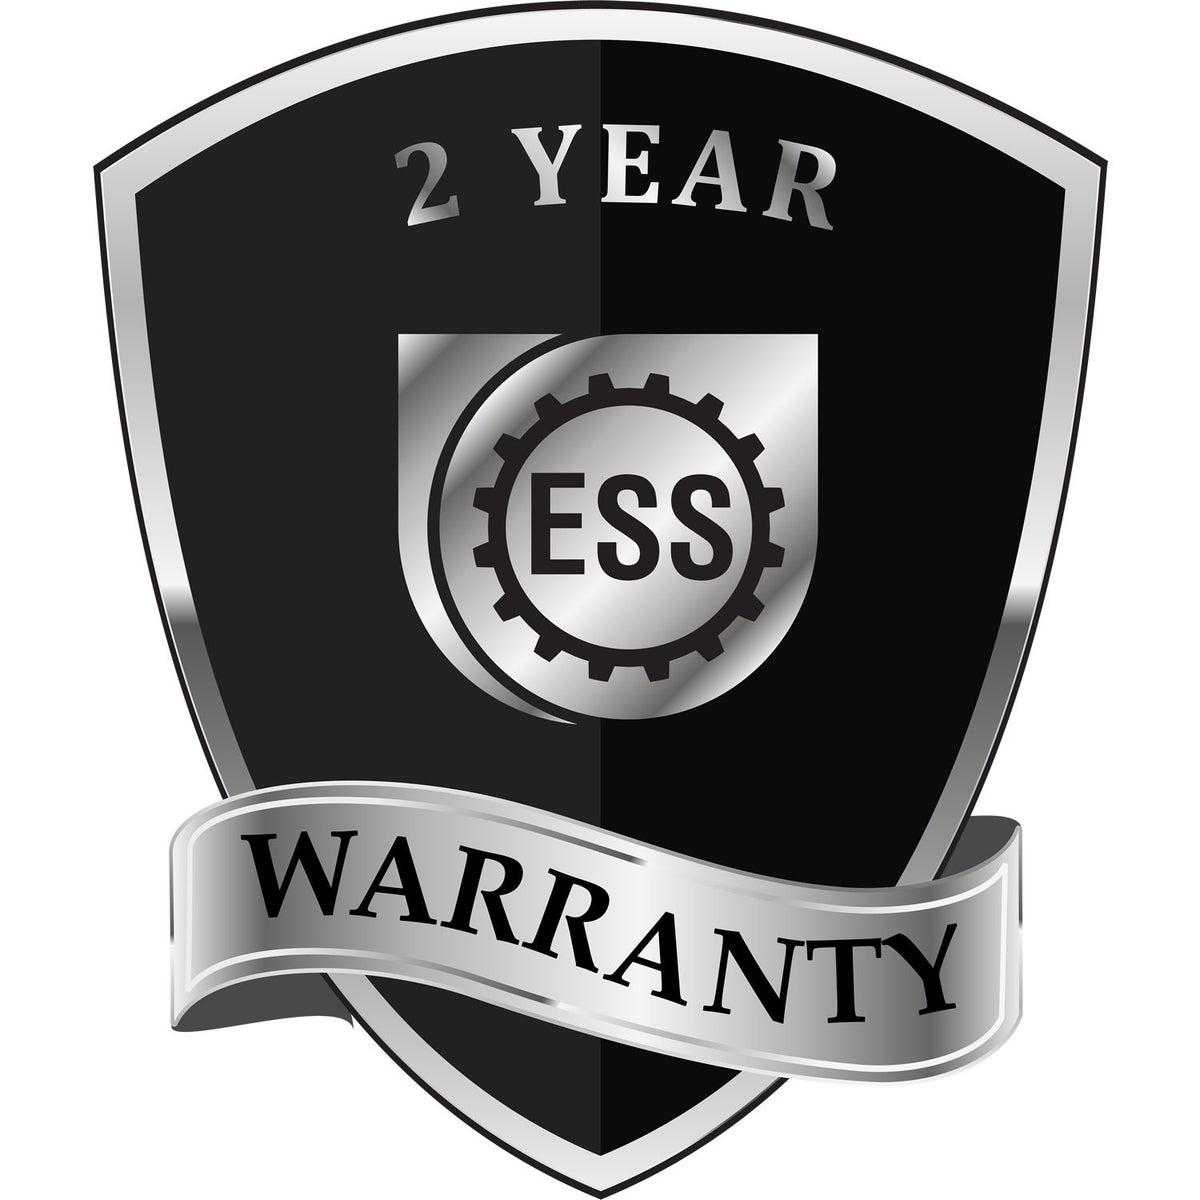 A black and silver badge or emblem showing warranty information for the Gift Maryland Geologist Seal